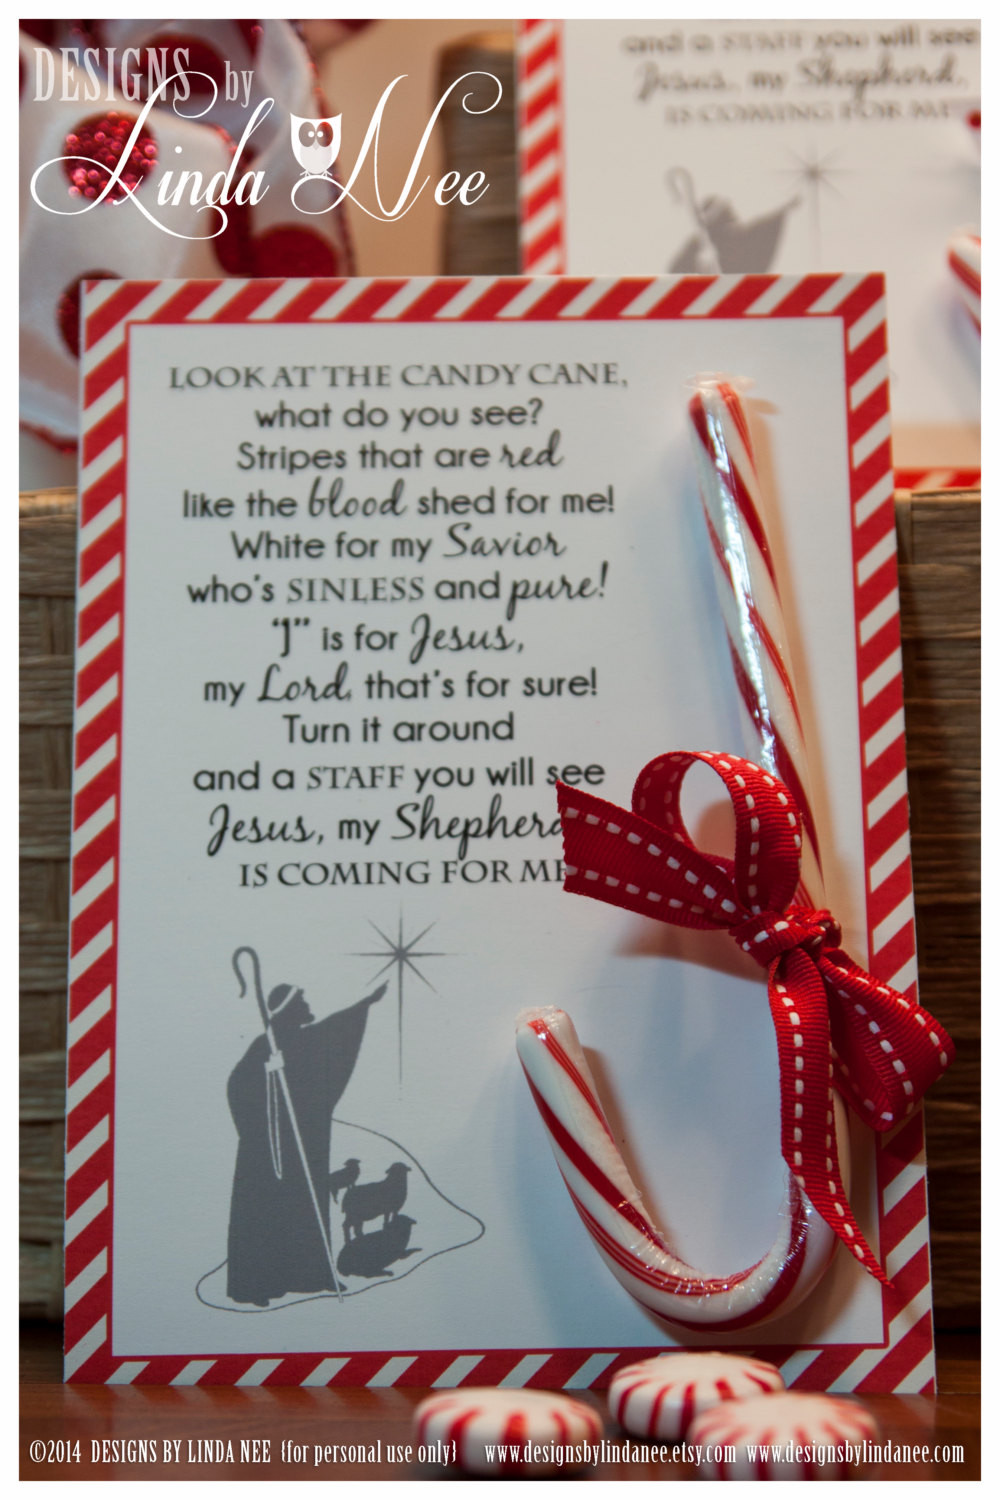 Story Of The Candy Cane At Christmas
 Legend of the Candy Cane Card for Witnessing at Christmas